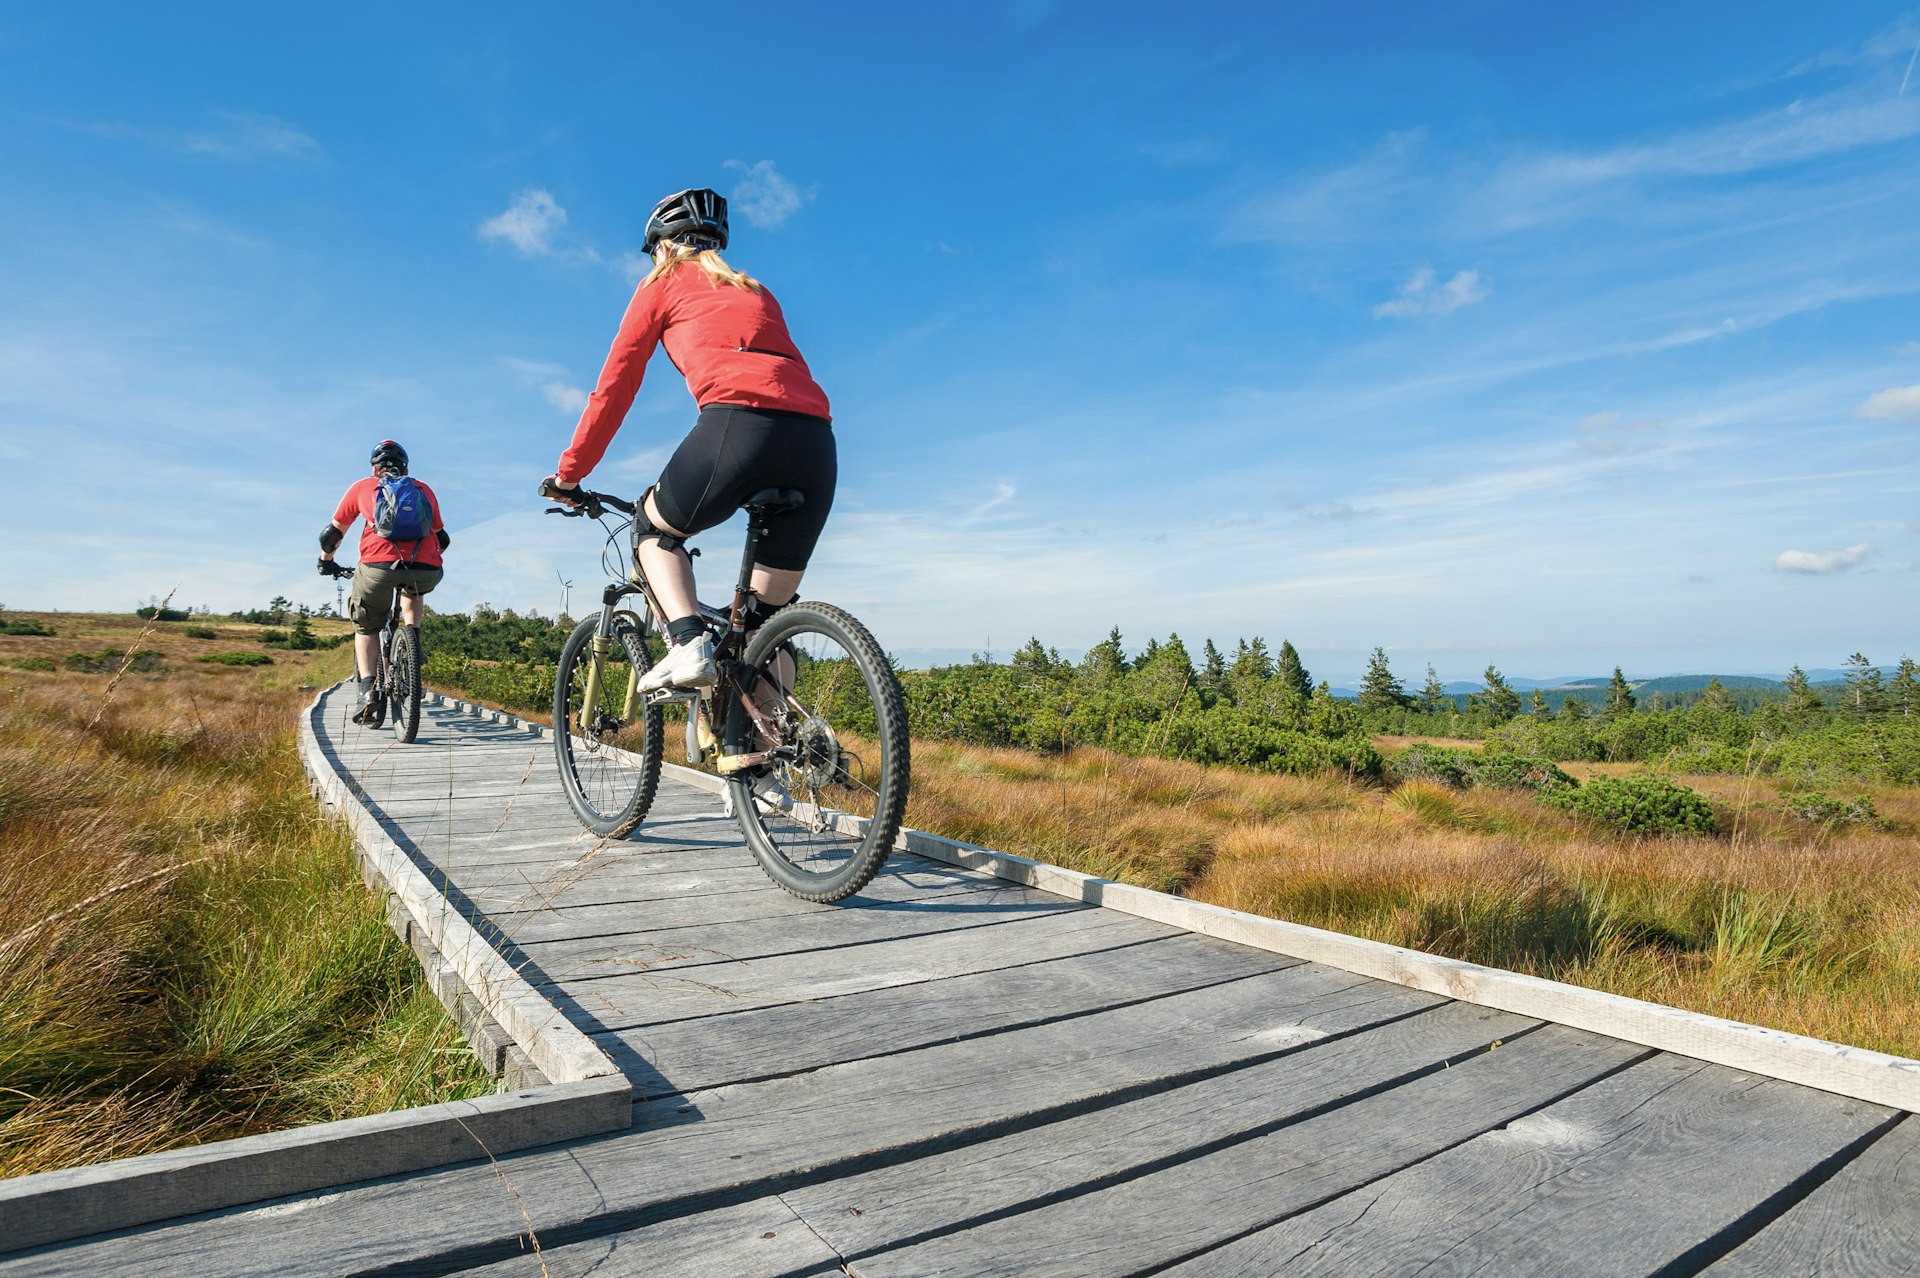 Cyclists on the boardwalk in the Hornisgrinde high moor landscape Germany